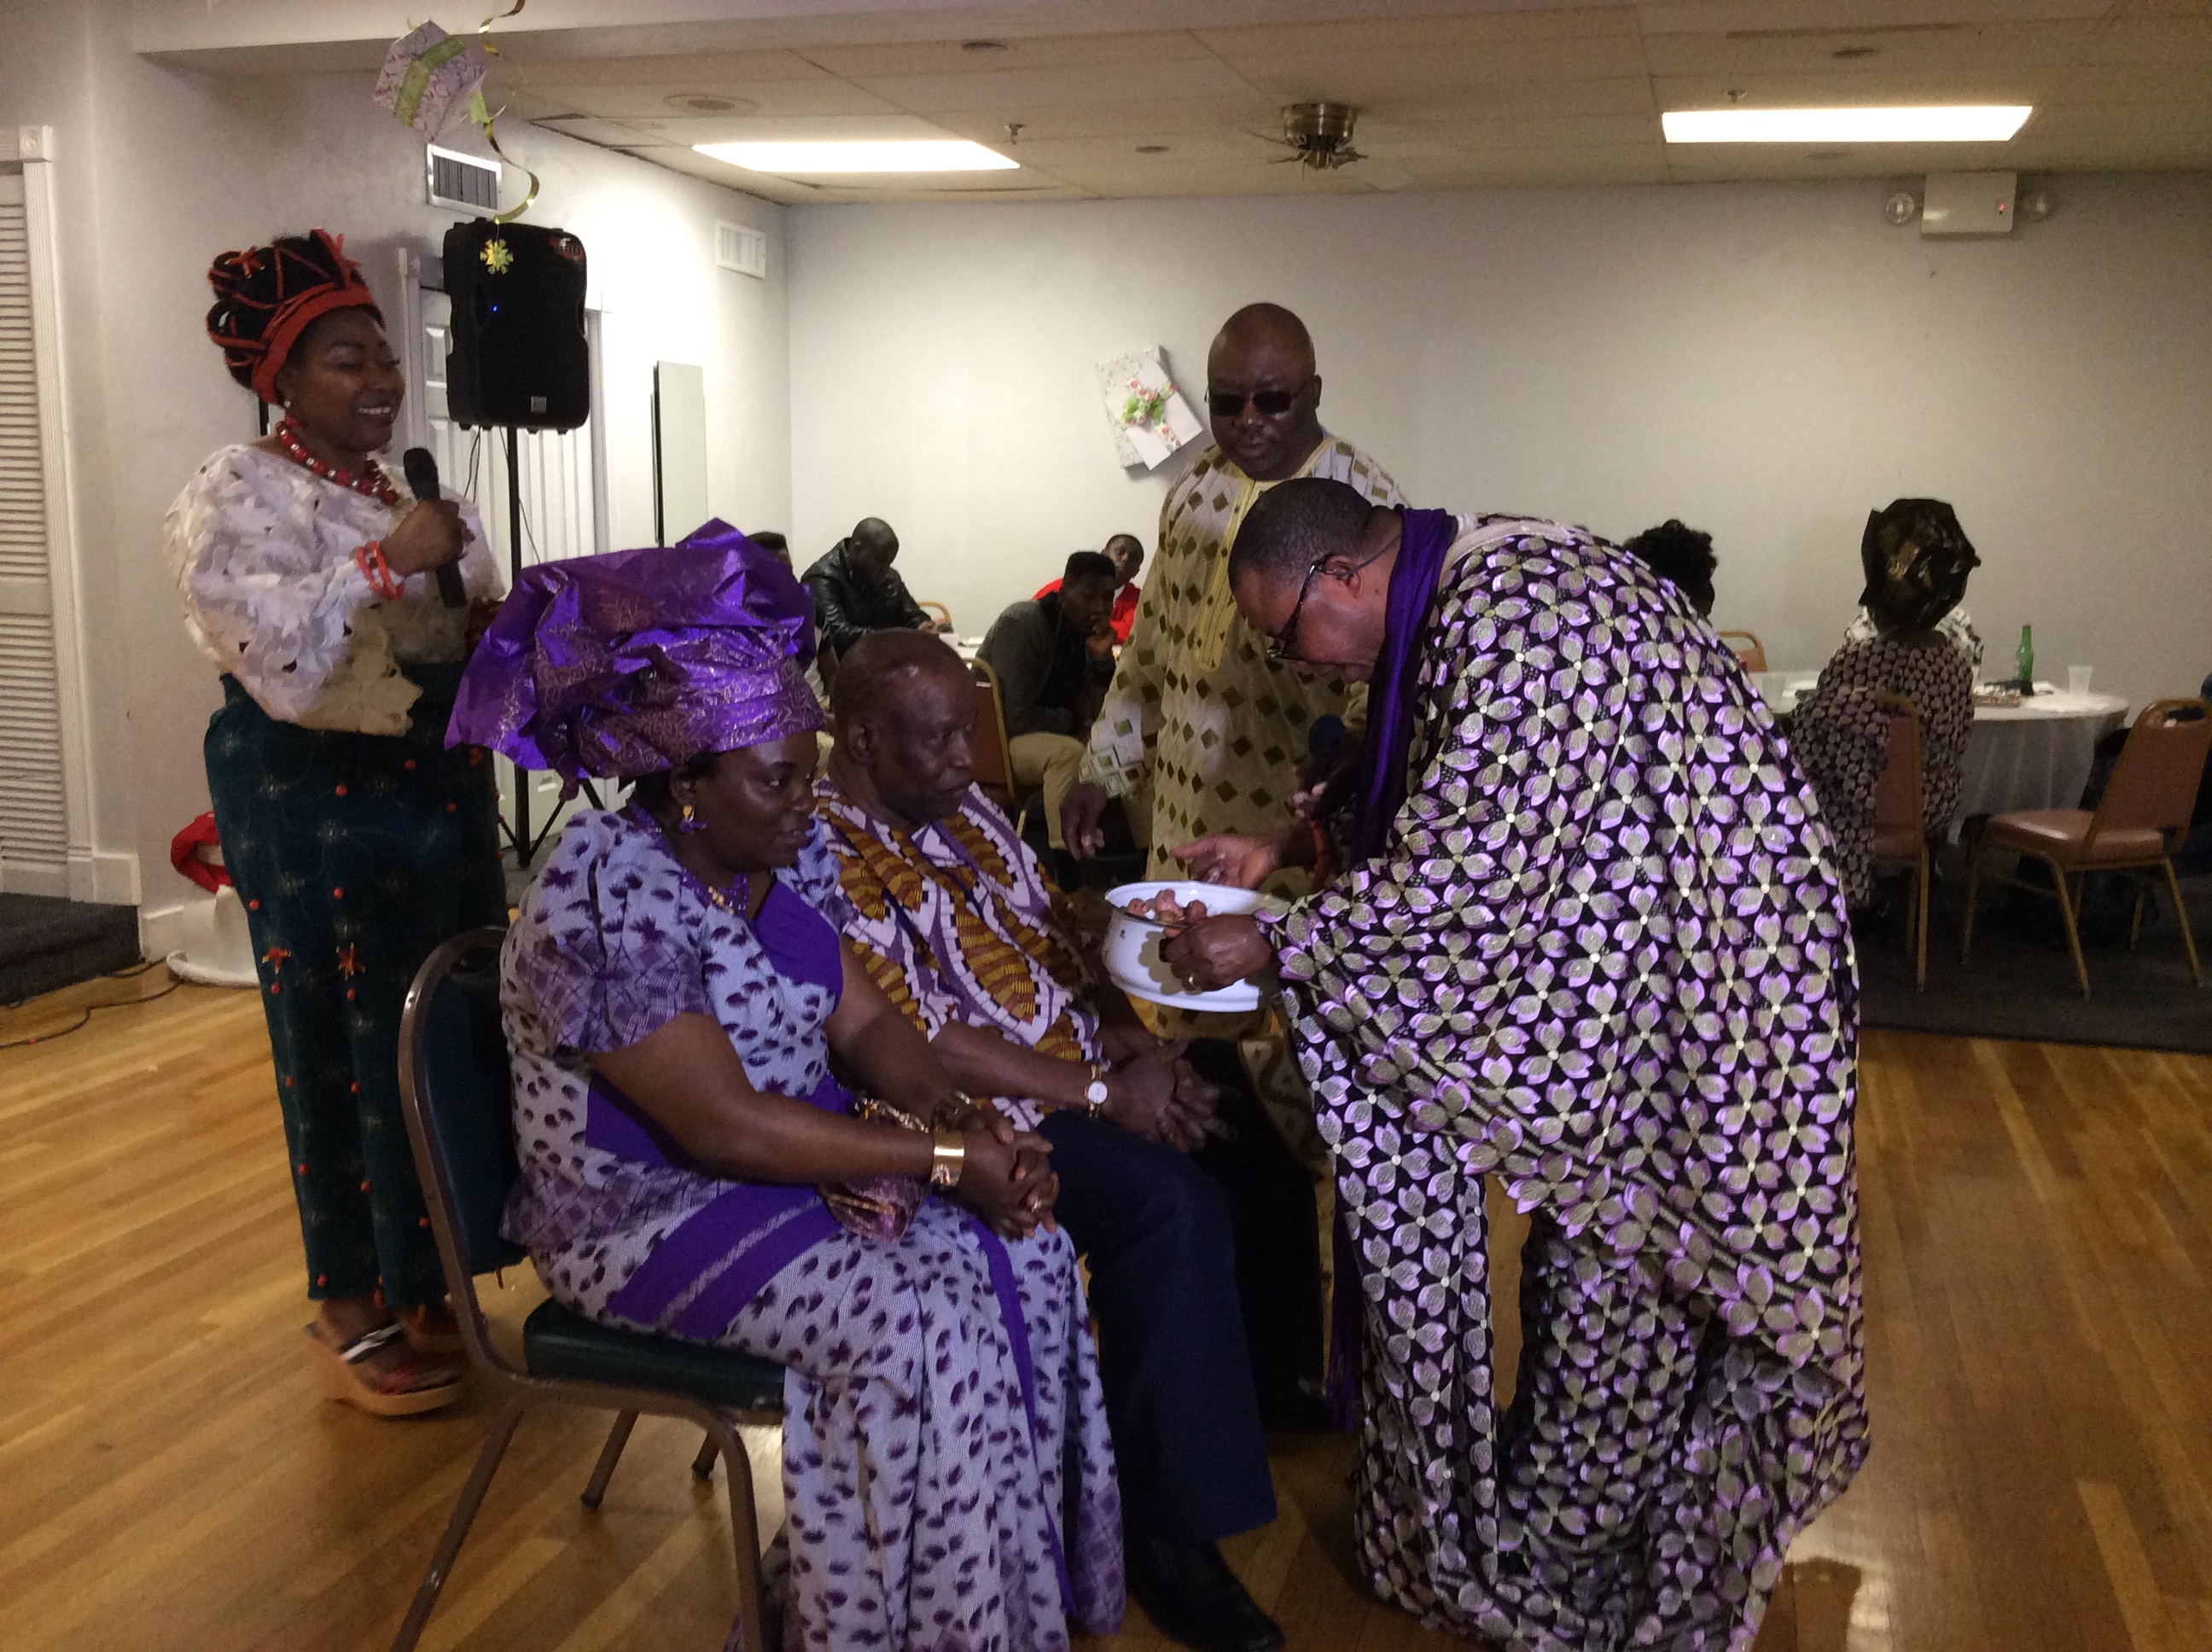 Photo shows Adams Aliu Otokiti, Secretary-General, Benin Club of Massachusetts performing the ceremony of prayer, thanksgiving and blessing at the Igue Festival in Boston. Seated are Mr. and Mrs. Udinyiwe Idahosa, receiving the anointing while Mrs. Bridget Ekhator and Mr. Ben Osasu Emovon look on. Photo, By Alltimepost.com